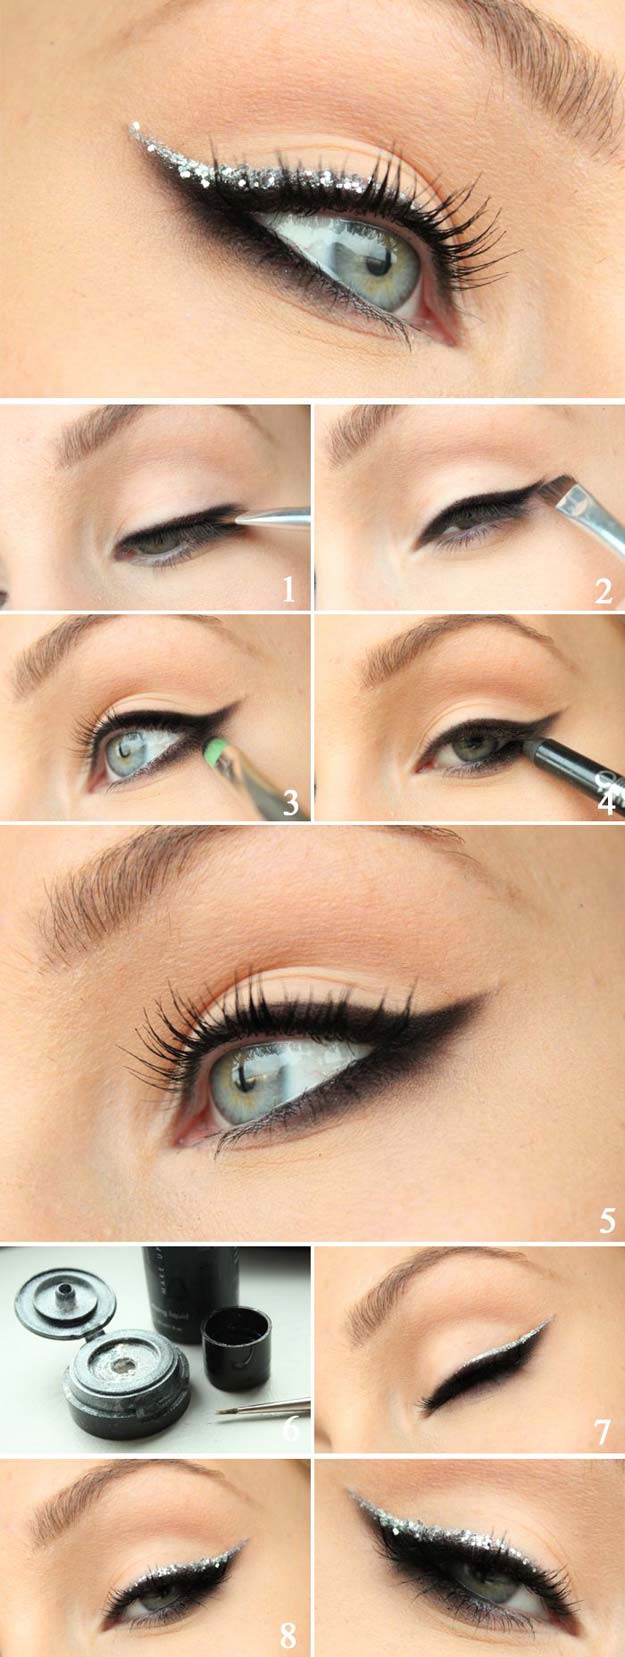 Best Makeup Tutorials for Teens -Holiday Glitter - Easy Makeup Ideas for Beginners - Step by Step Tutorials for Foundation, Eye Shadow, Lipstick, Cheeks, Contour, Eyebrows and Eyes - Awesome Makeup Hacks and Tips for Simple DIY Beauty - Day and Evening Looks http://diyprojectsforteens.com/makeup-tutorials-teens 